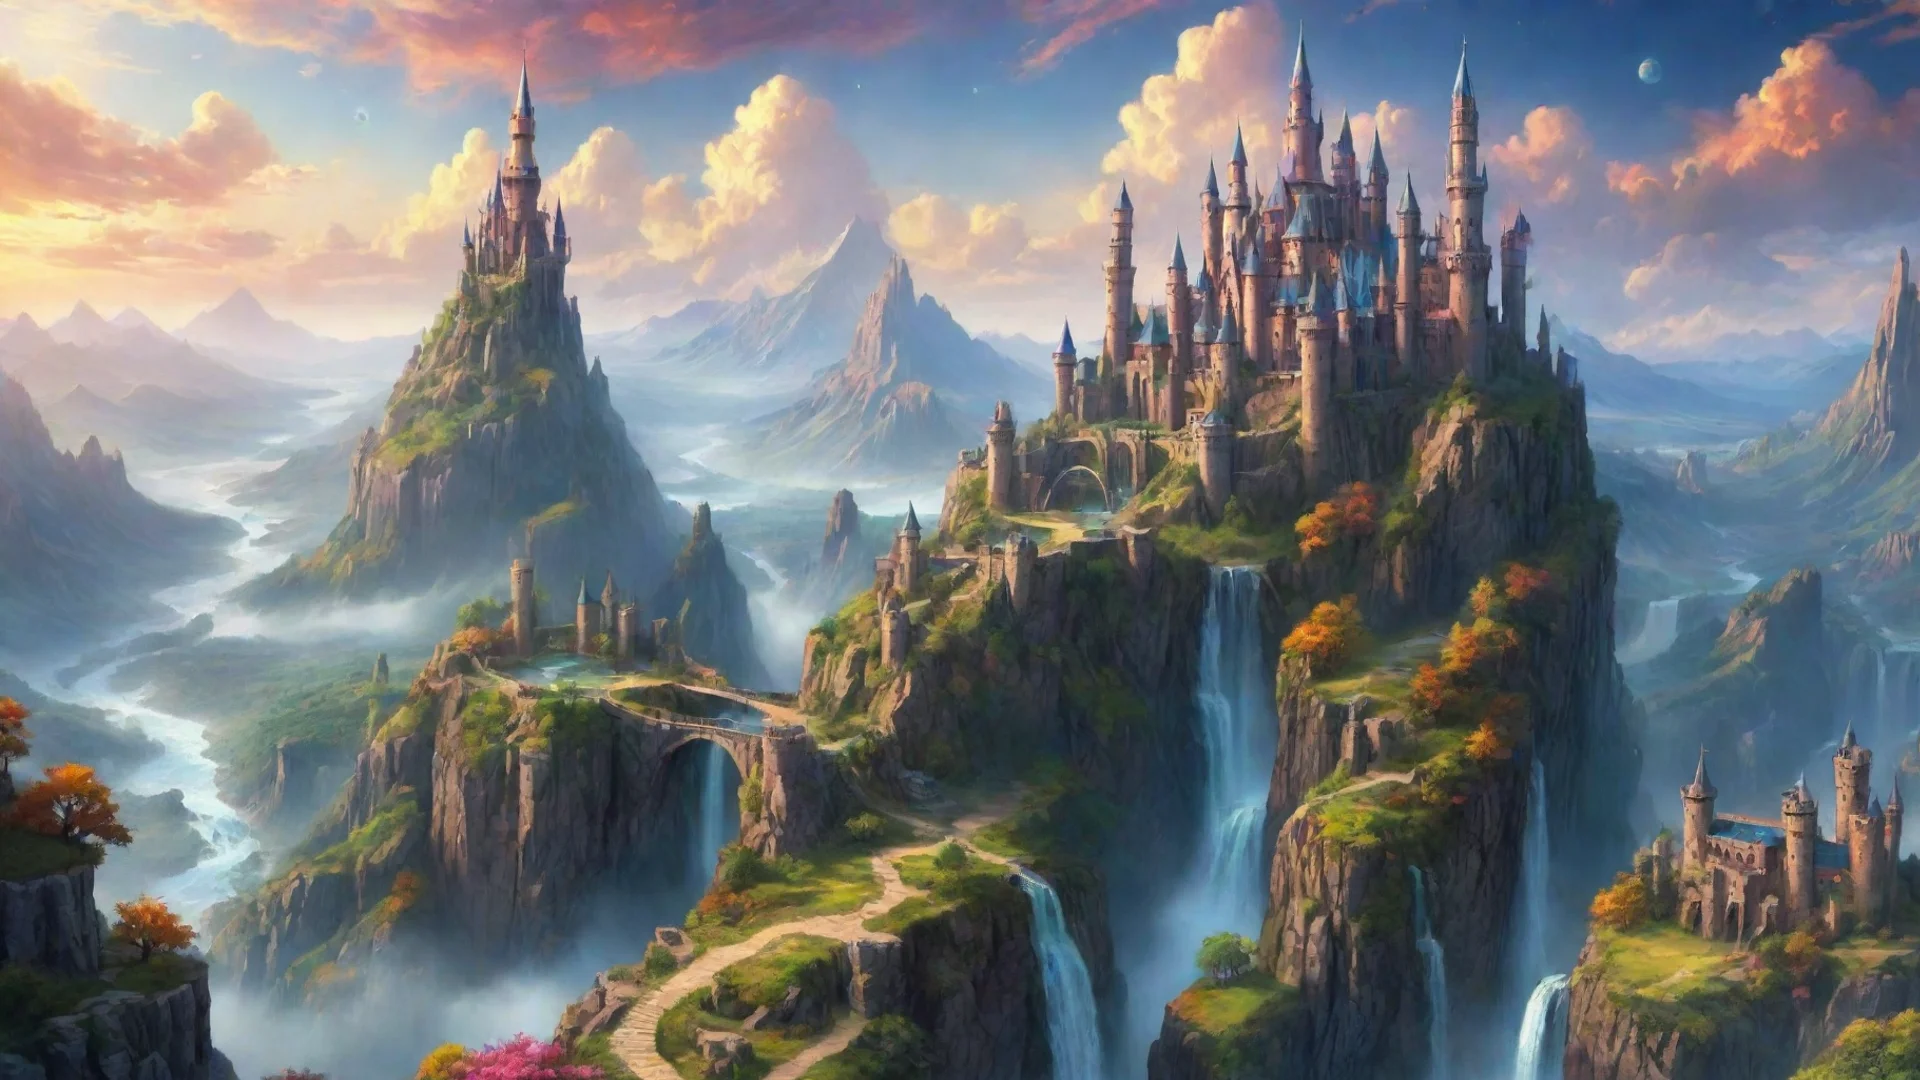 amazing amazing scenery hd detailed colorful planets in sky realistic castles spiral towers high cliffs waterfalls beautiful wonderful aesthetic awesome portrait 2 wide